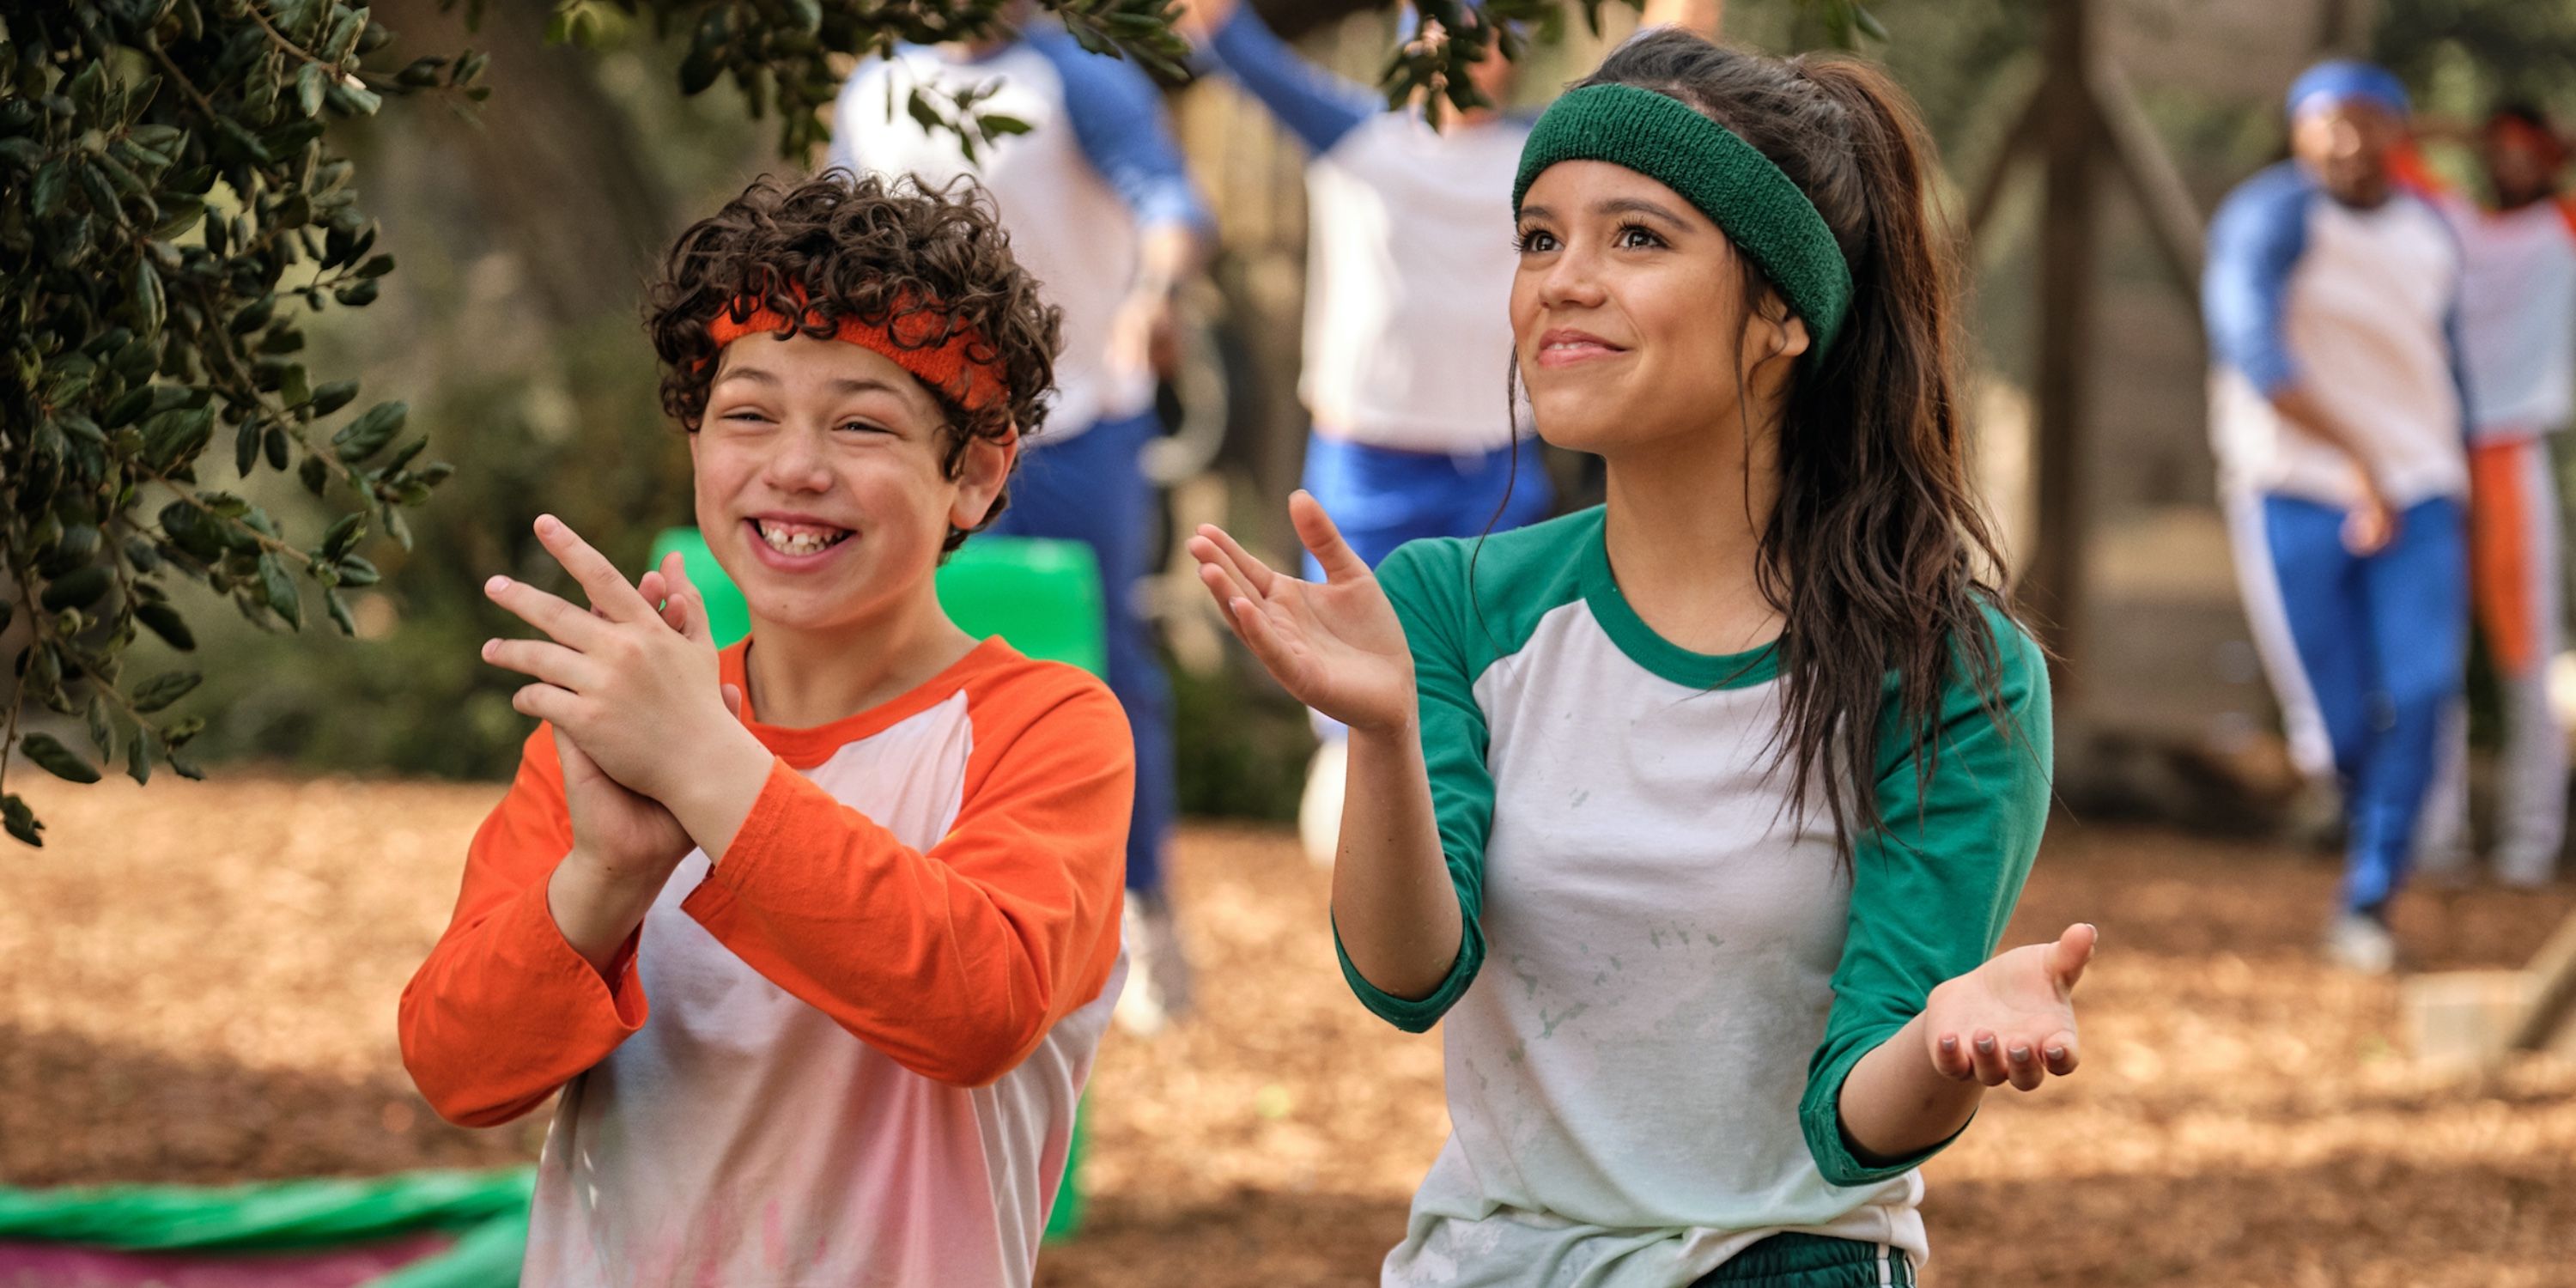 Julian Lerner as Nando Torres and Jenna Ortega as Katie Torres in Yes Day on Netflix